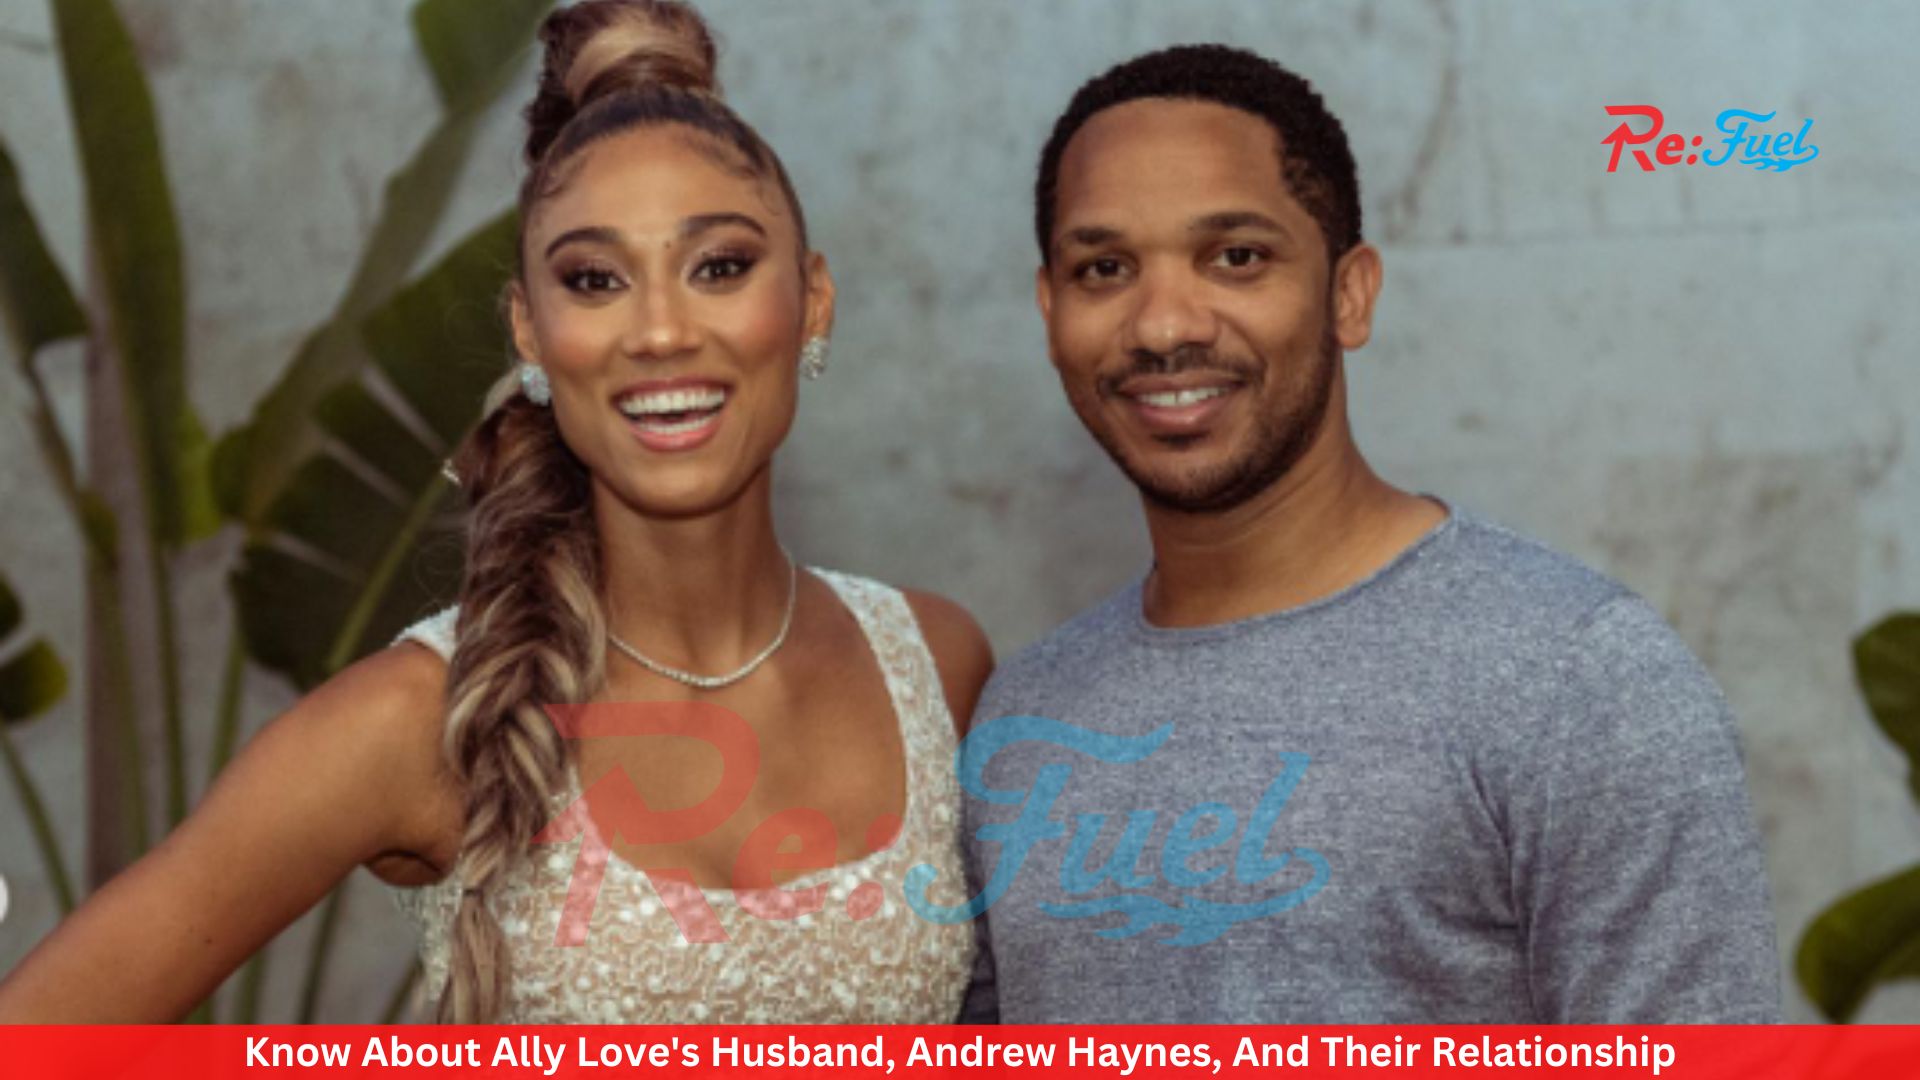 Know About Ally Love's Husband, Andrew Haynes, And Their Relationship